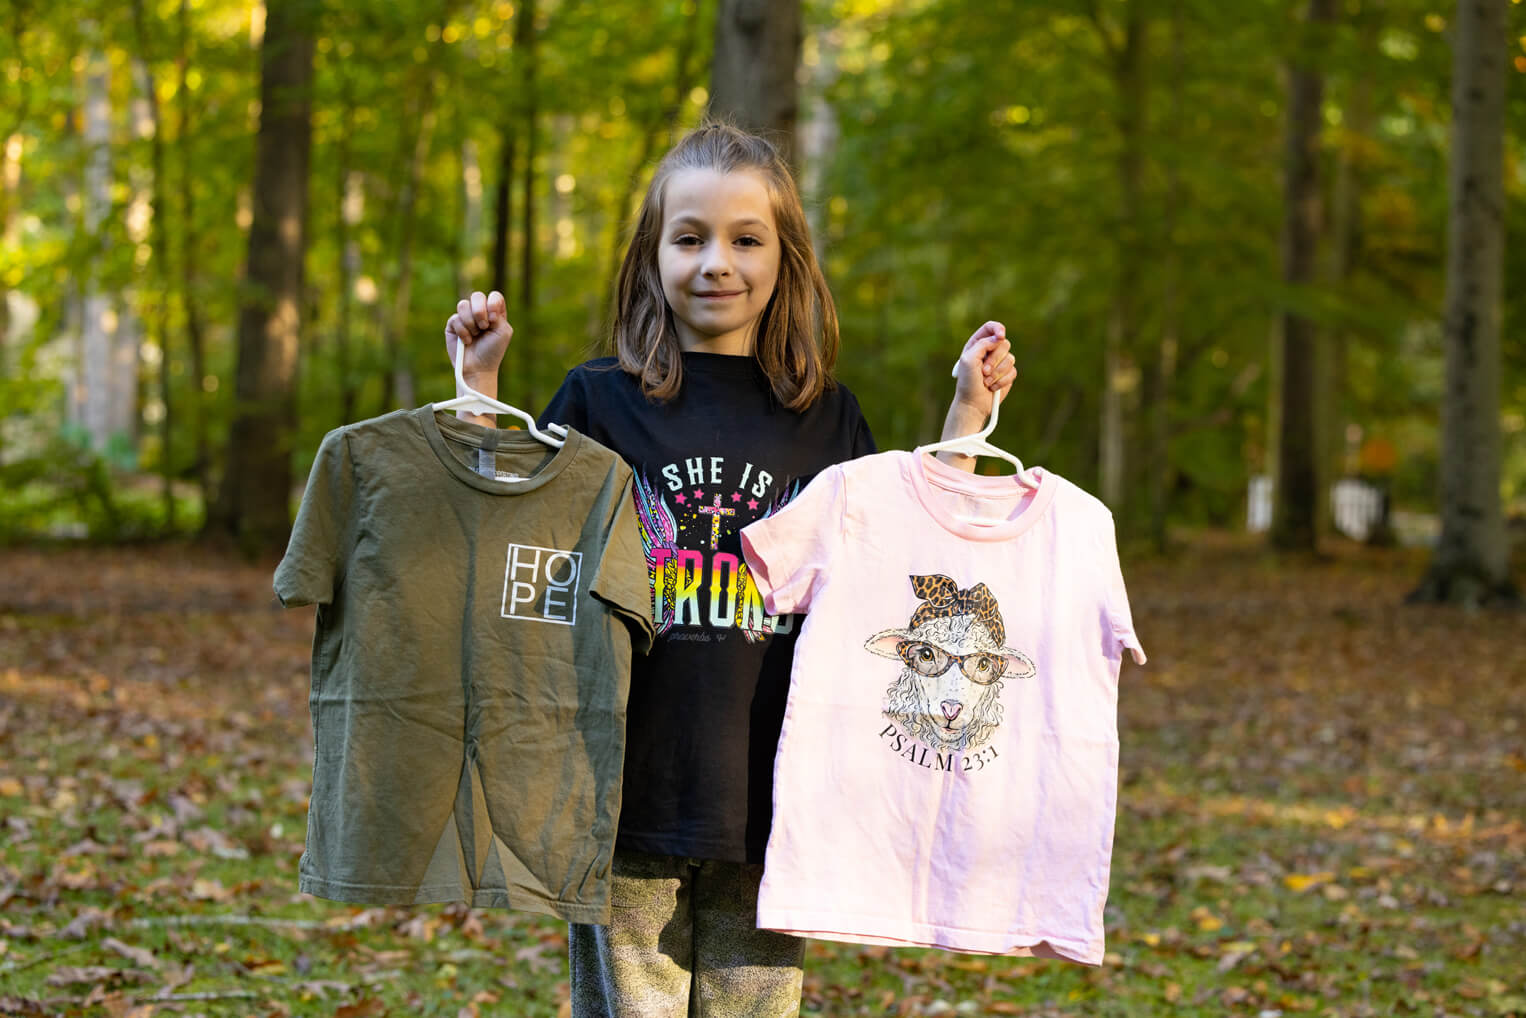 She created T-shirts for sale to help purchase special "wow" items and other quality gifts for children.